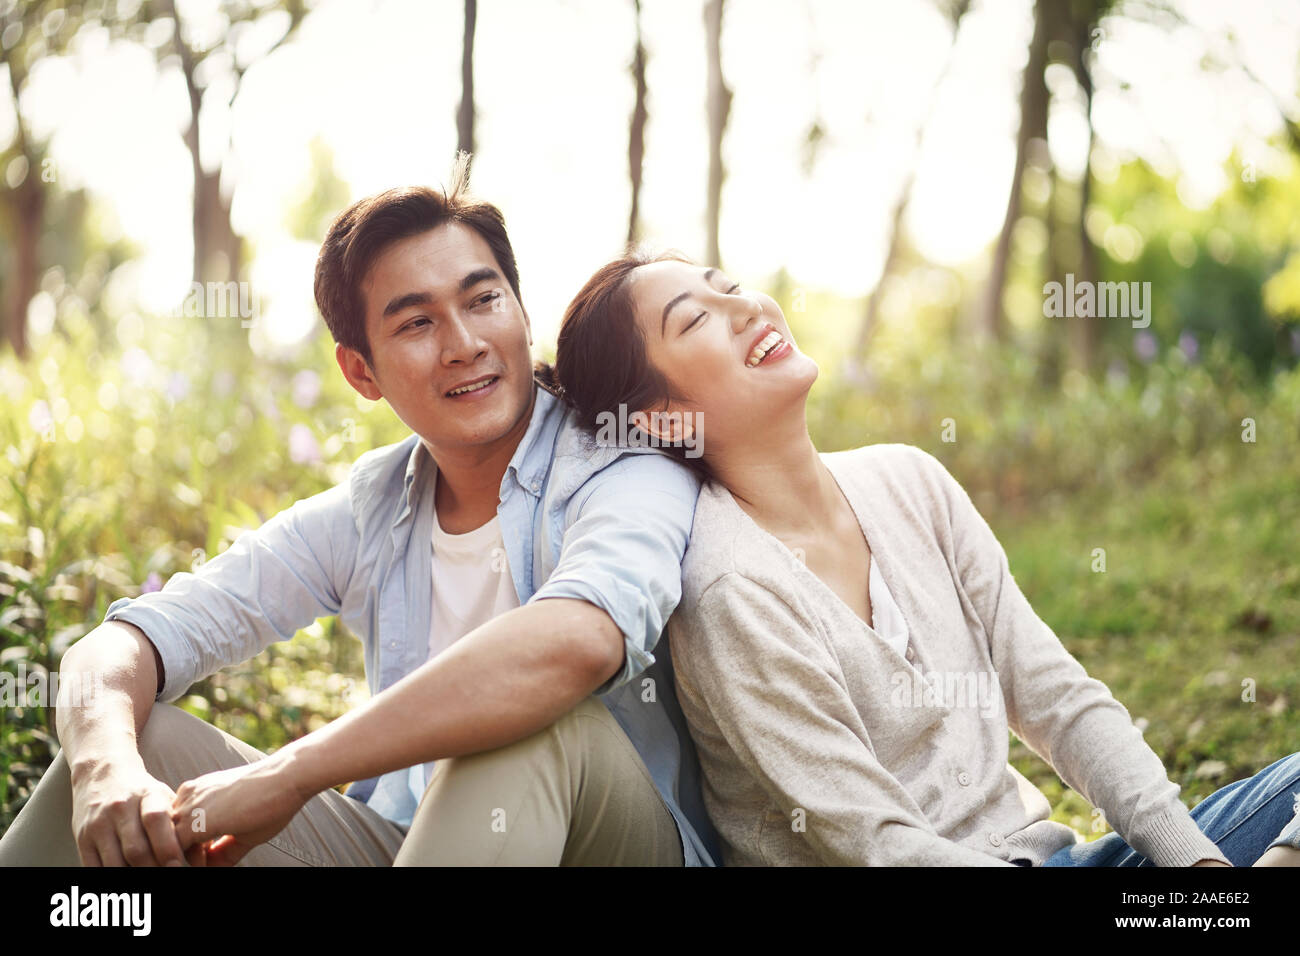 Beautiful happy young asian woman sitting on grass talking chatting relaxing in park Banque D'Images